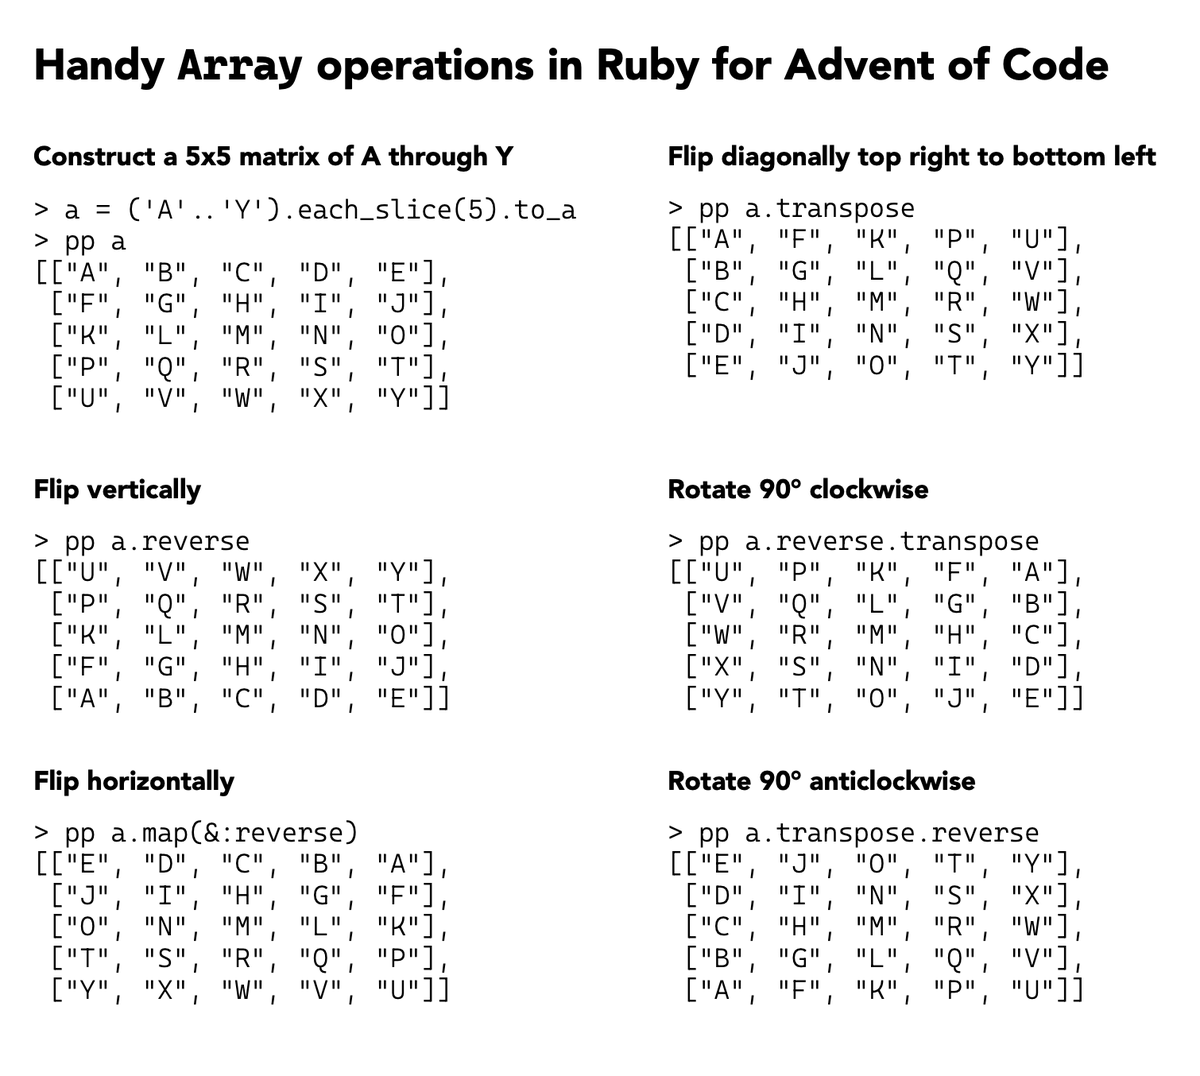 Jeremy Cole I Thought These Might Be Handy Tips For Those Doing The Adventofcode Challenges In Ruby There Are Many Array Operations Which Are Equivalent To Image Manipulations When Applied